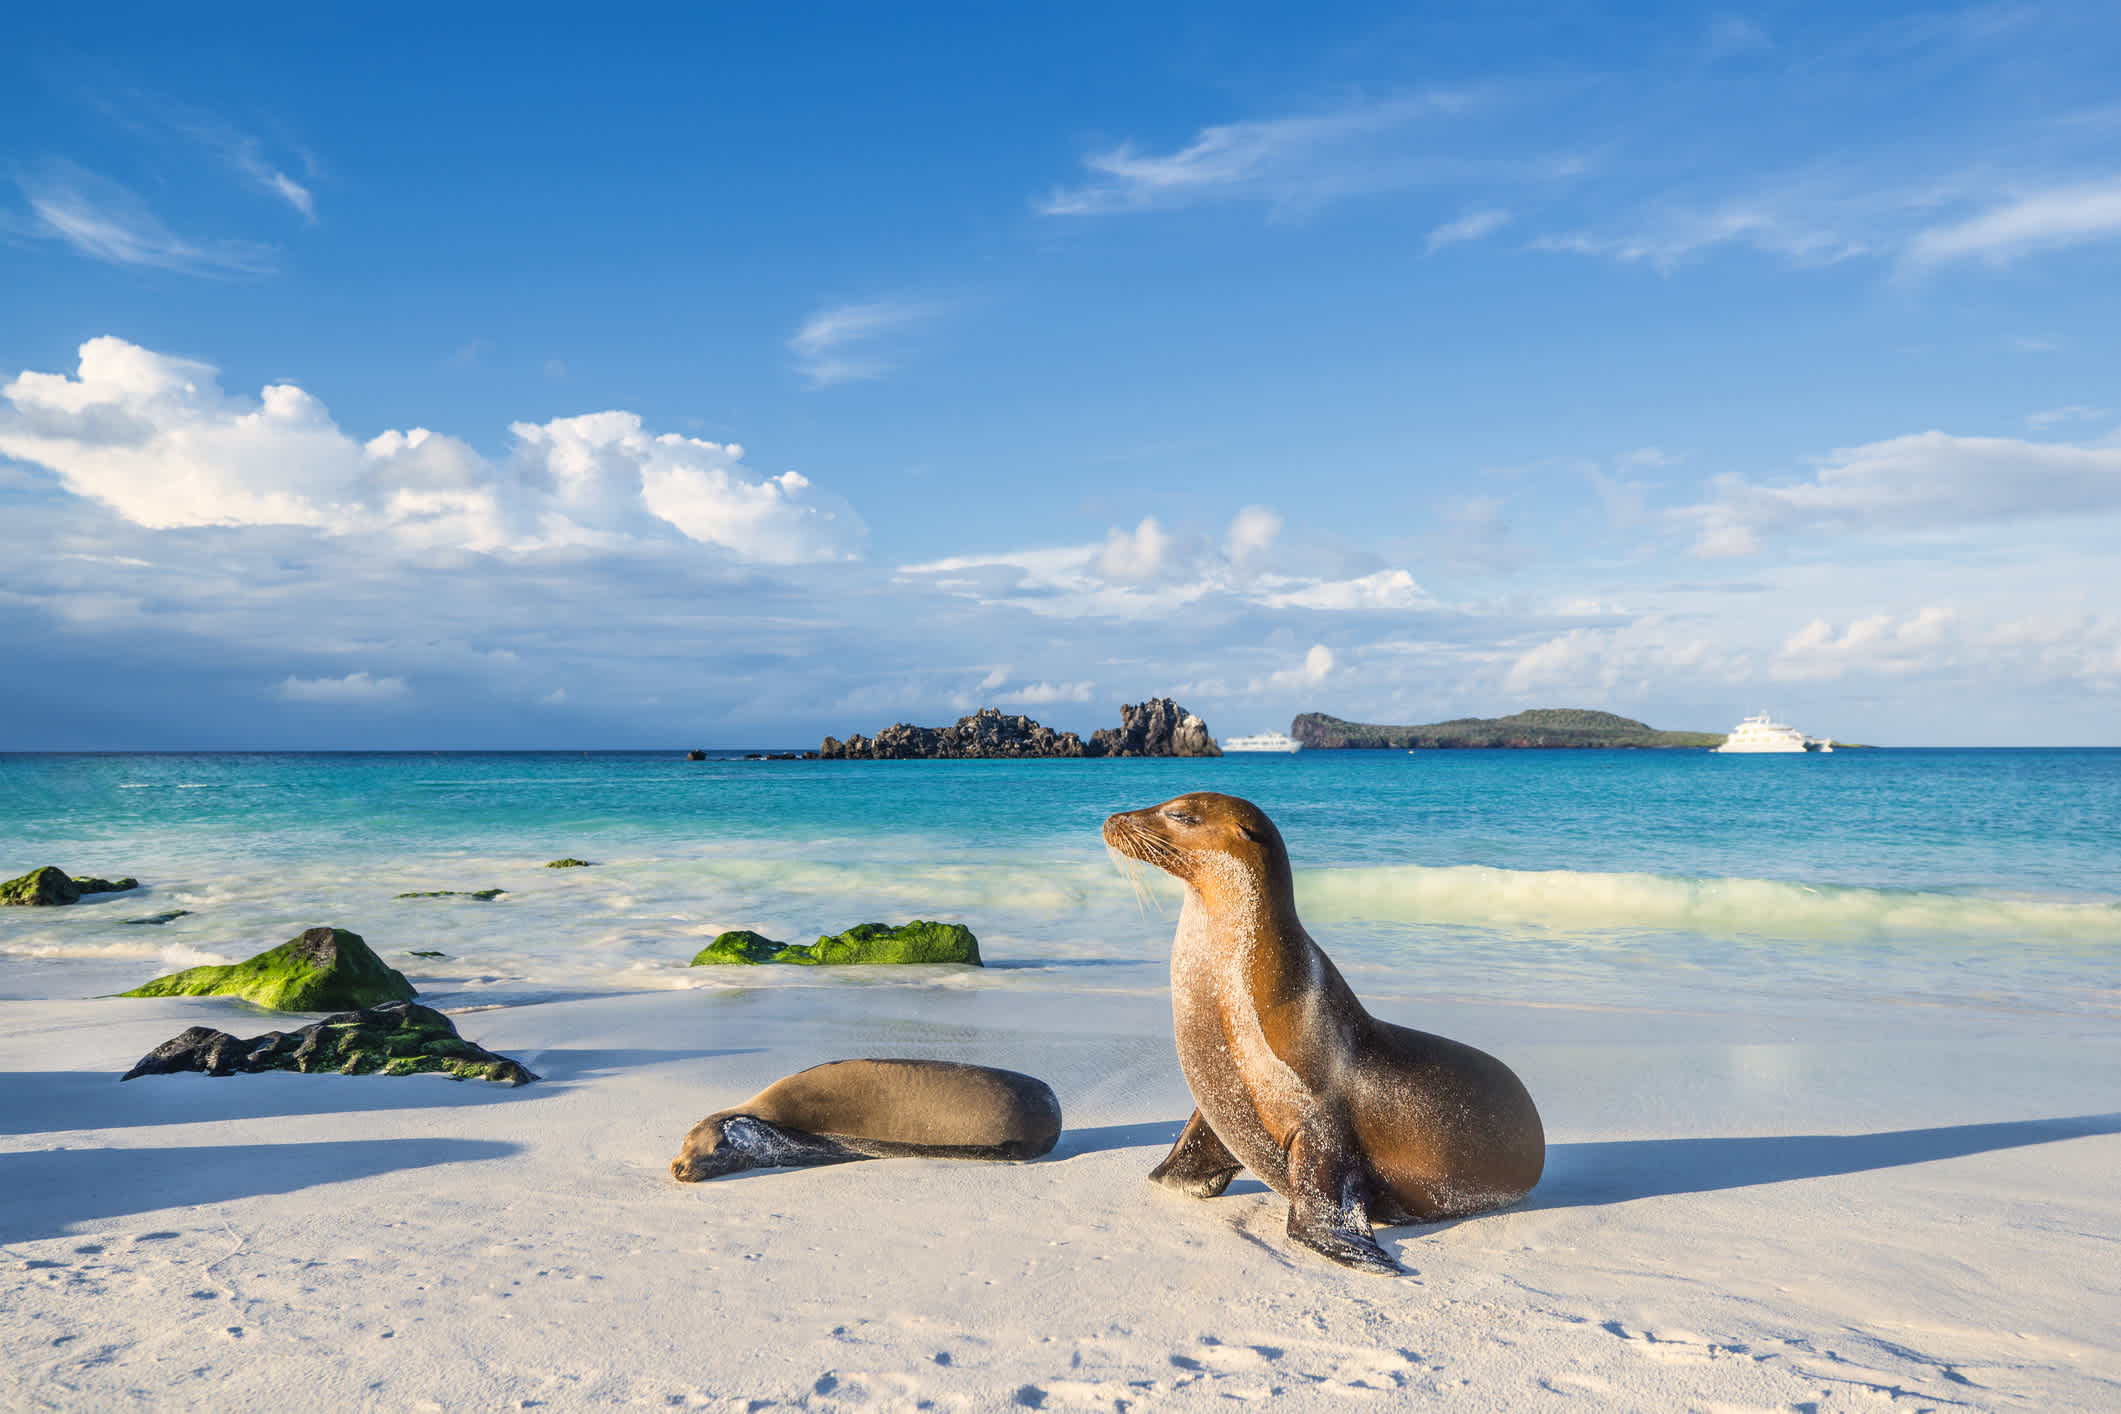 See beautiful seals on white beaches, pictured here, on a Galapagos Islands vacation